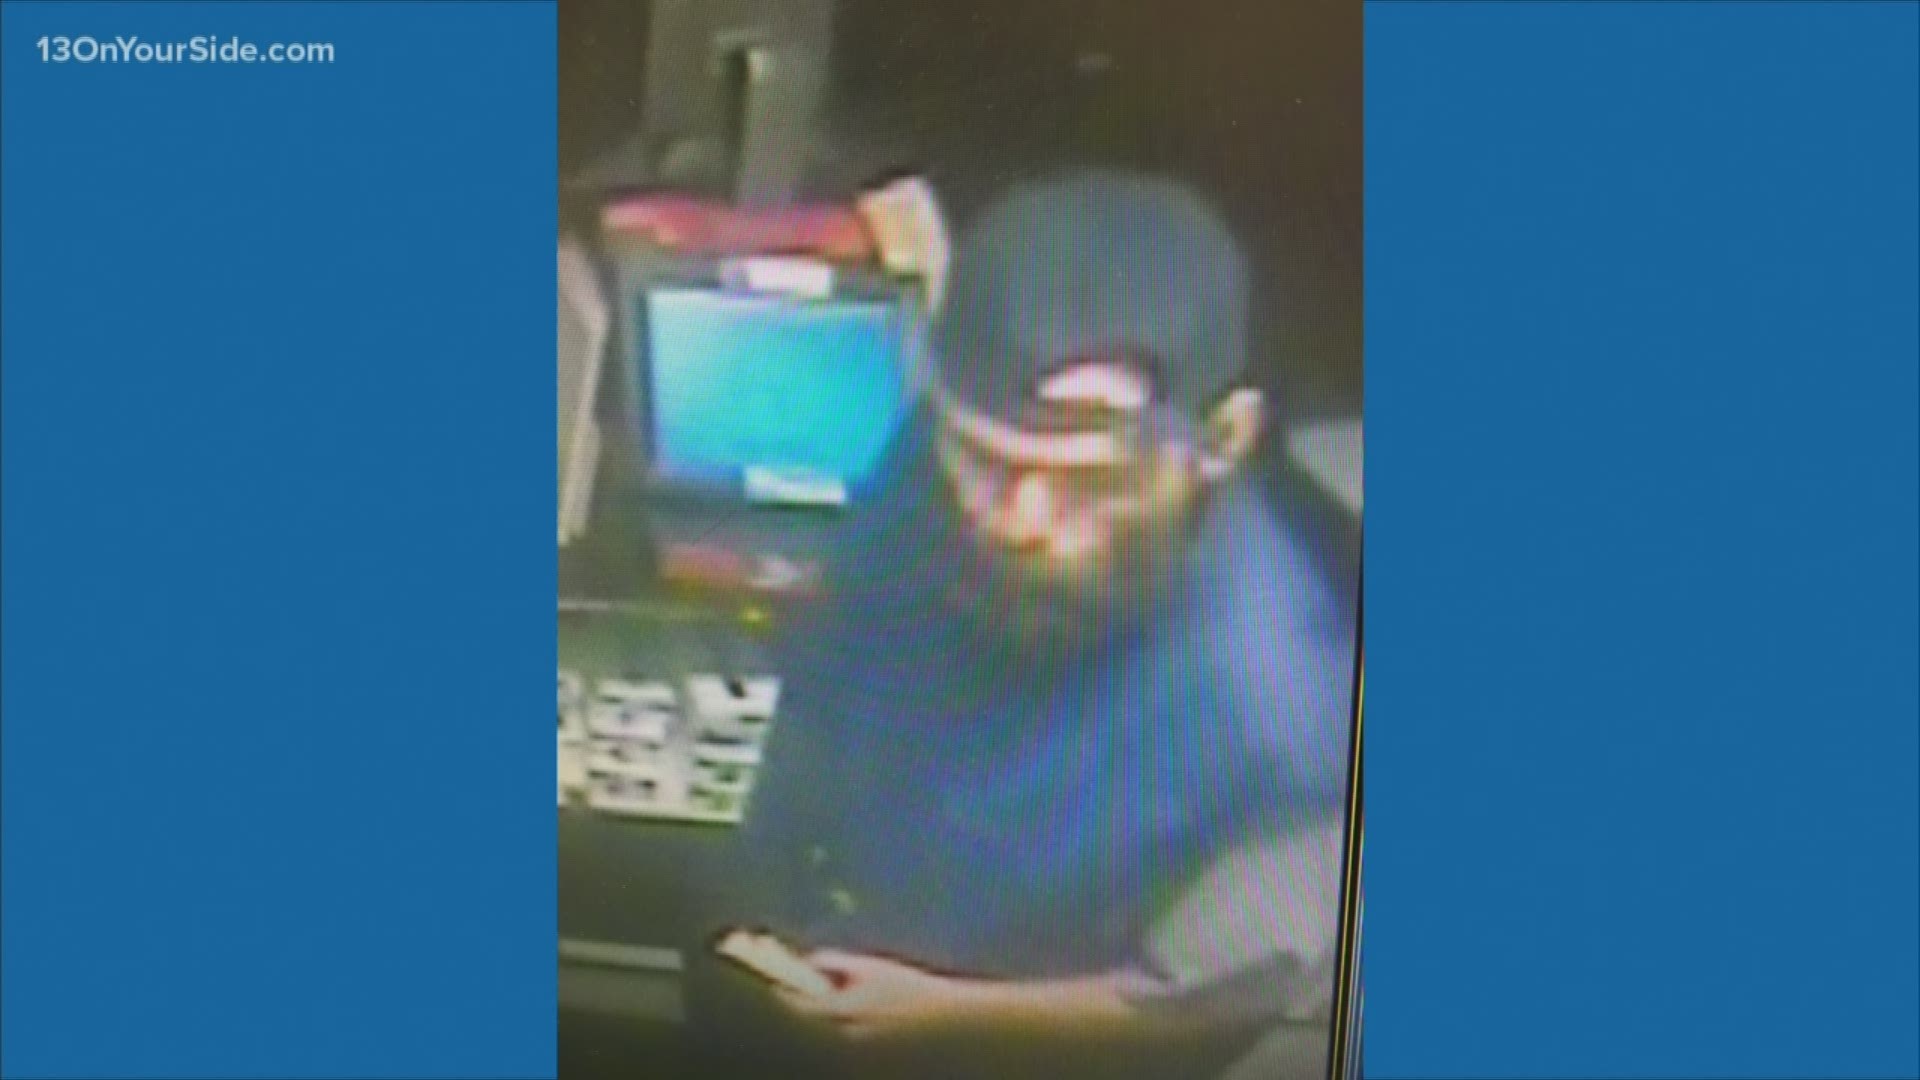 The Michigan State Police are asking for help in locating and identifying a man wanted for questioning in a recent break-in at Peterson Oil in Greenville.